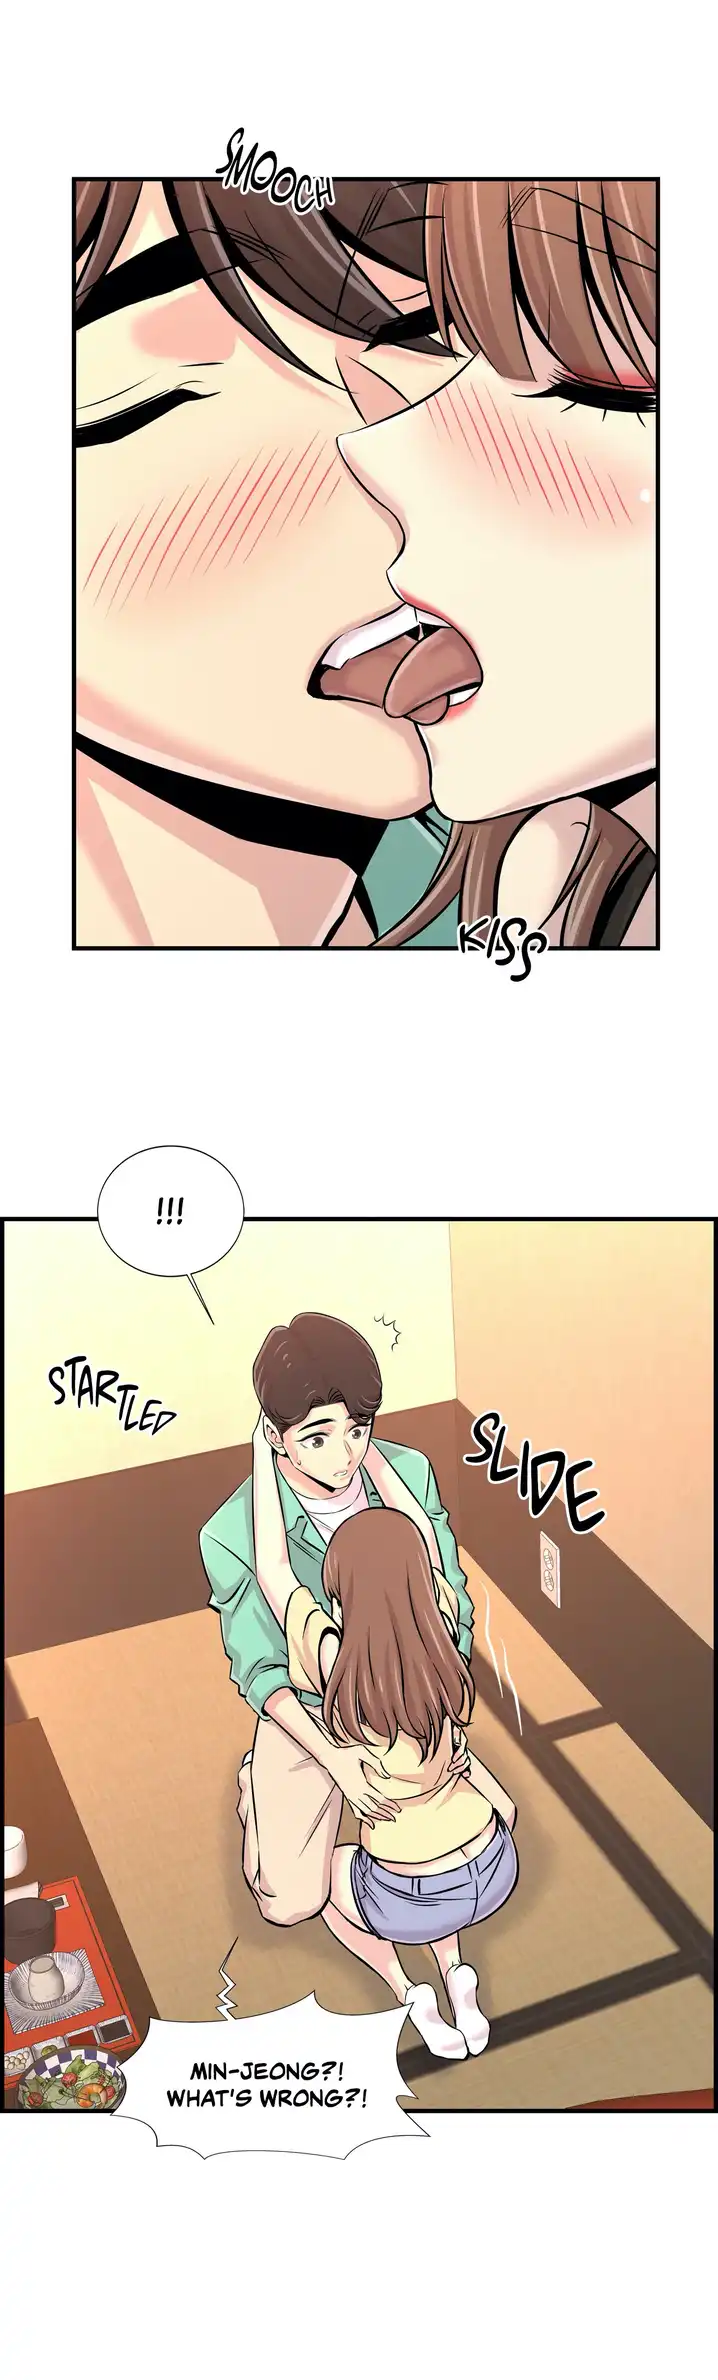 Cram School Scandal - Chapter 23 Page 2